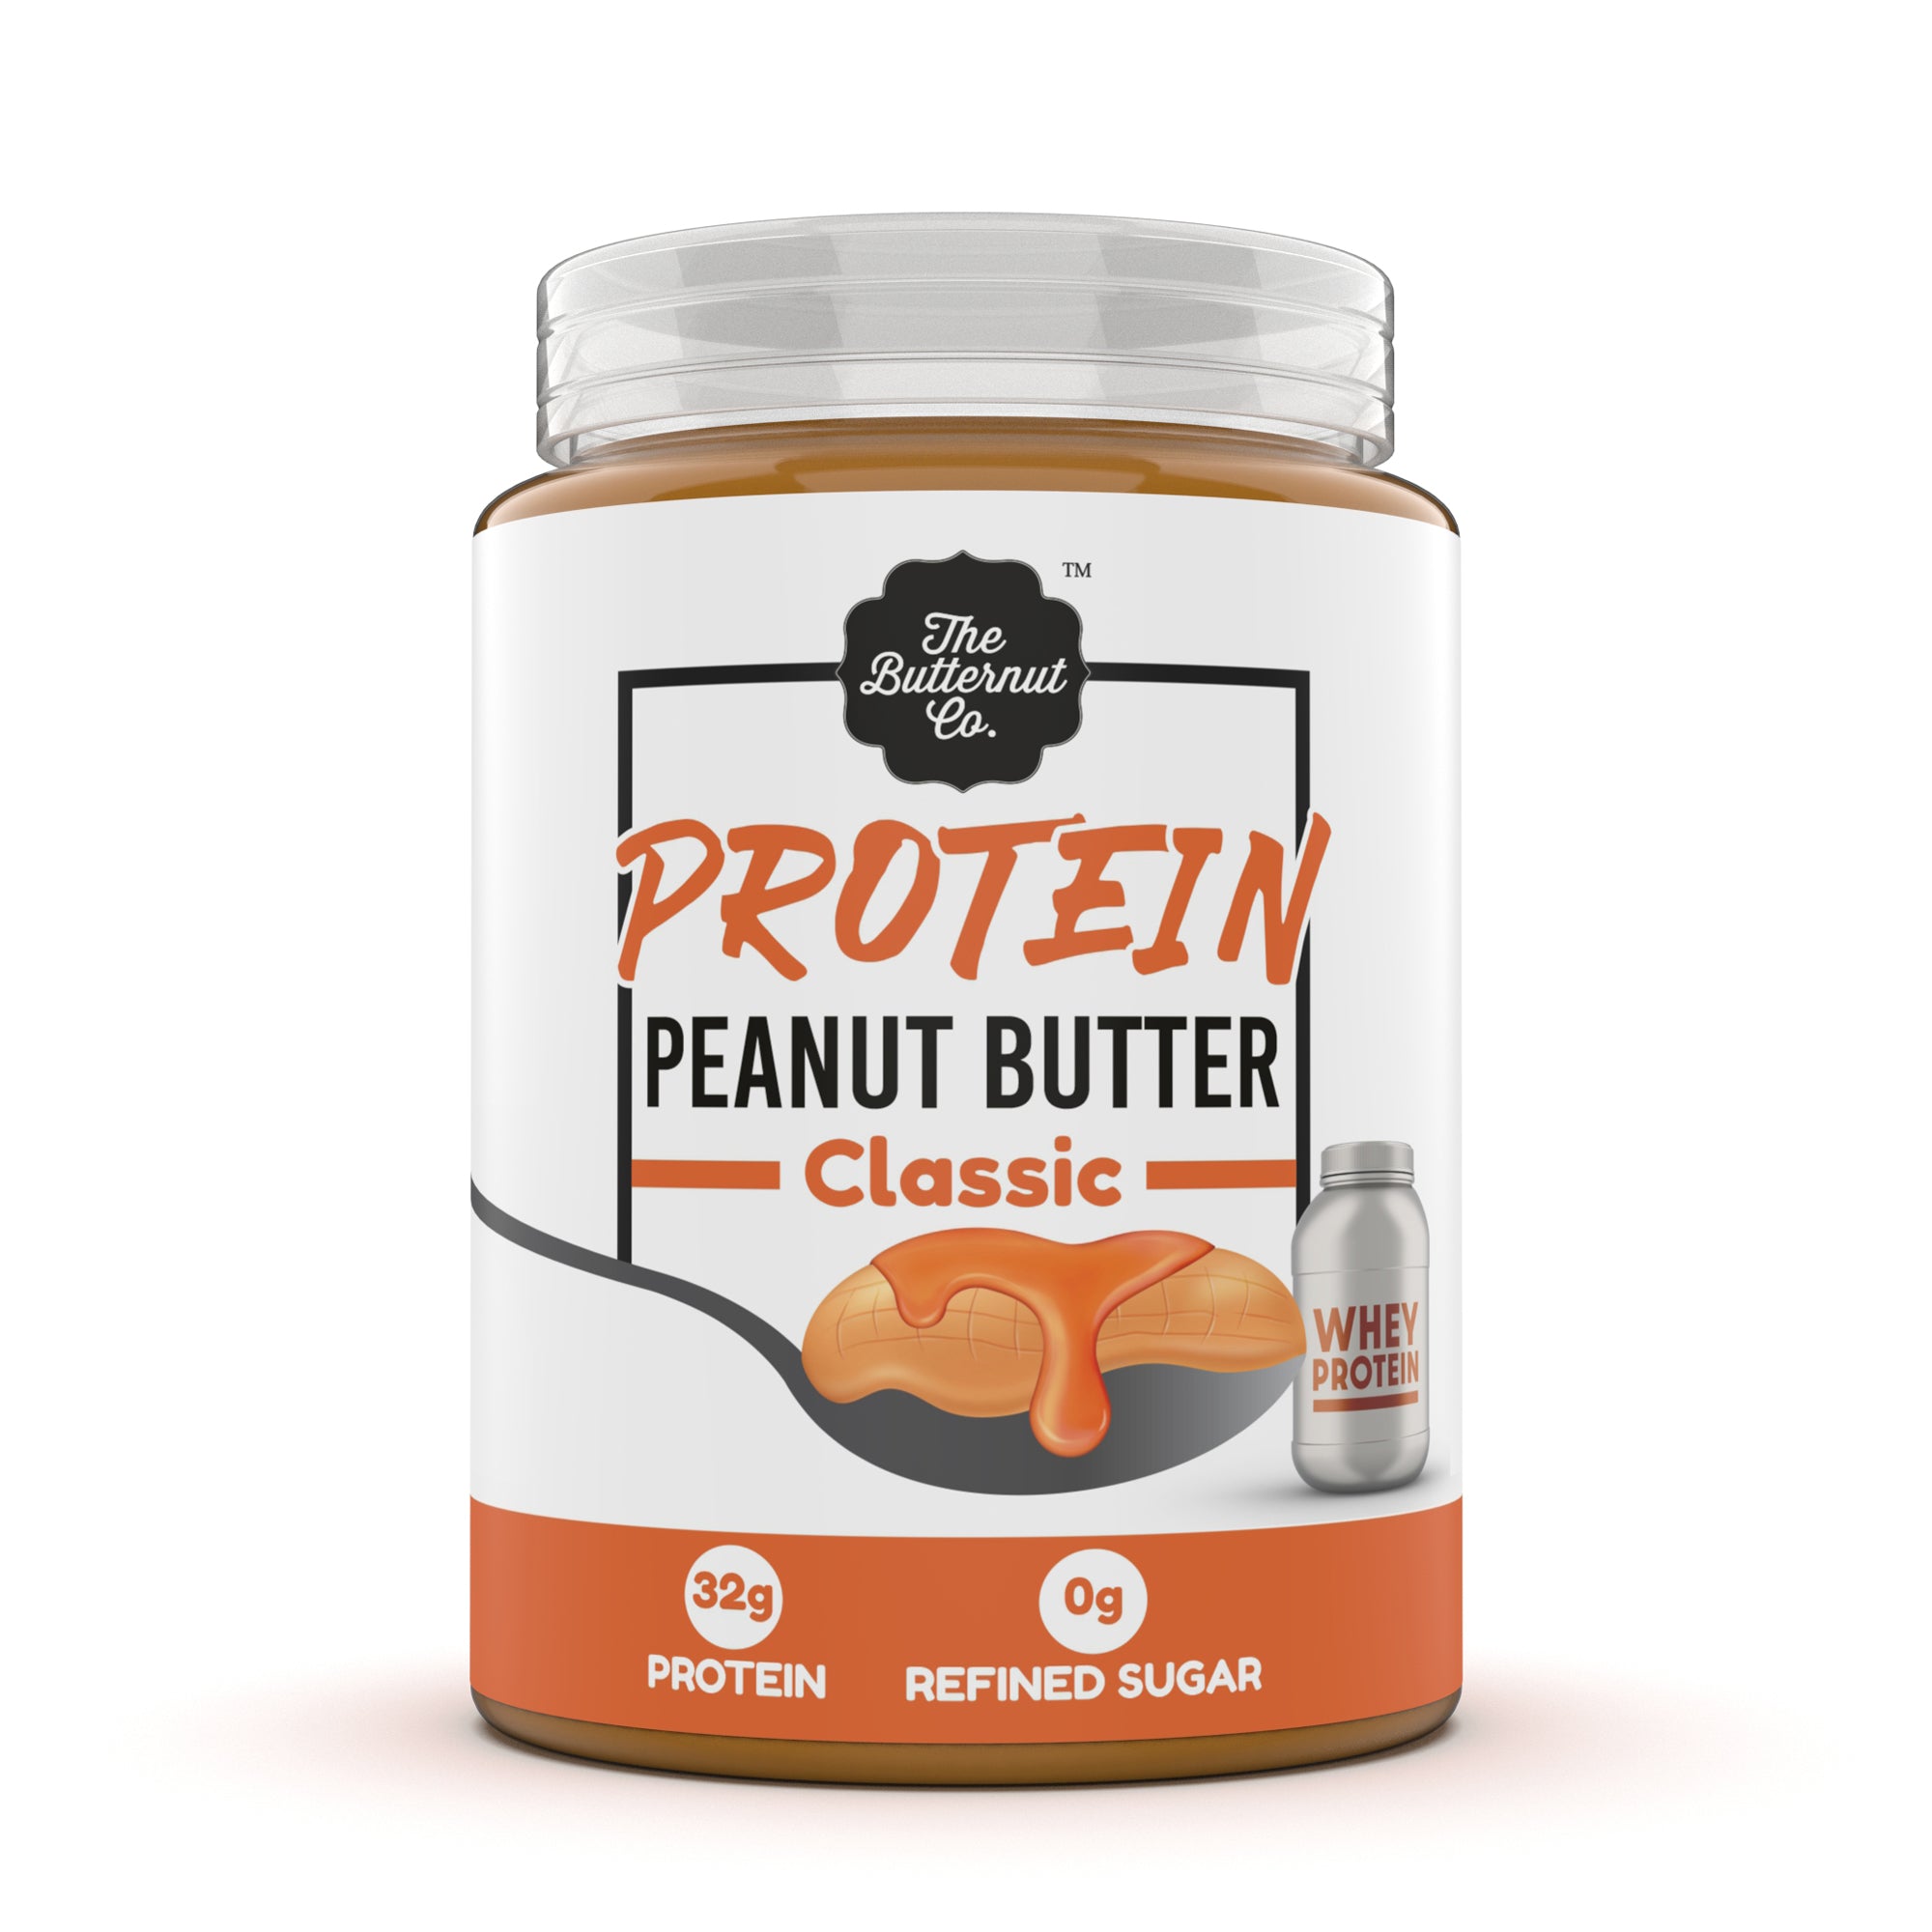 The Butternut Co. Protein Classic Peanut Butter